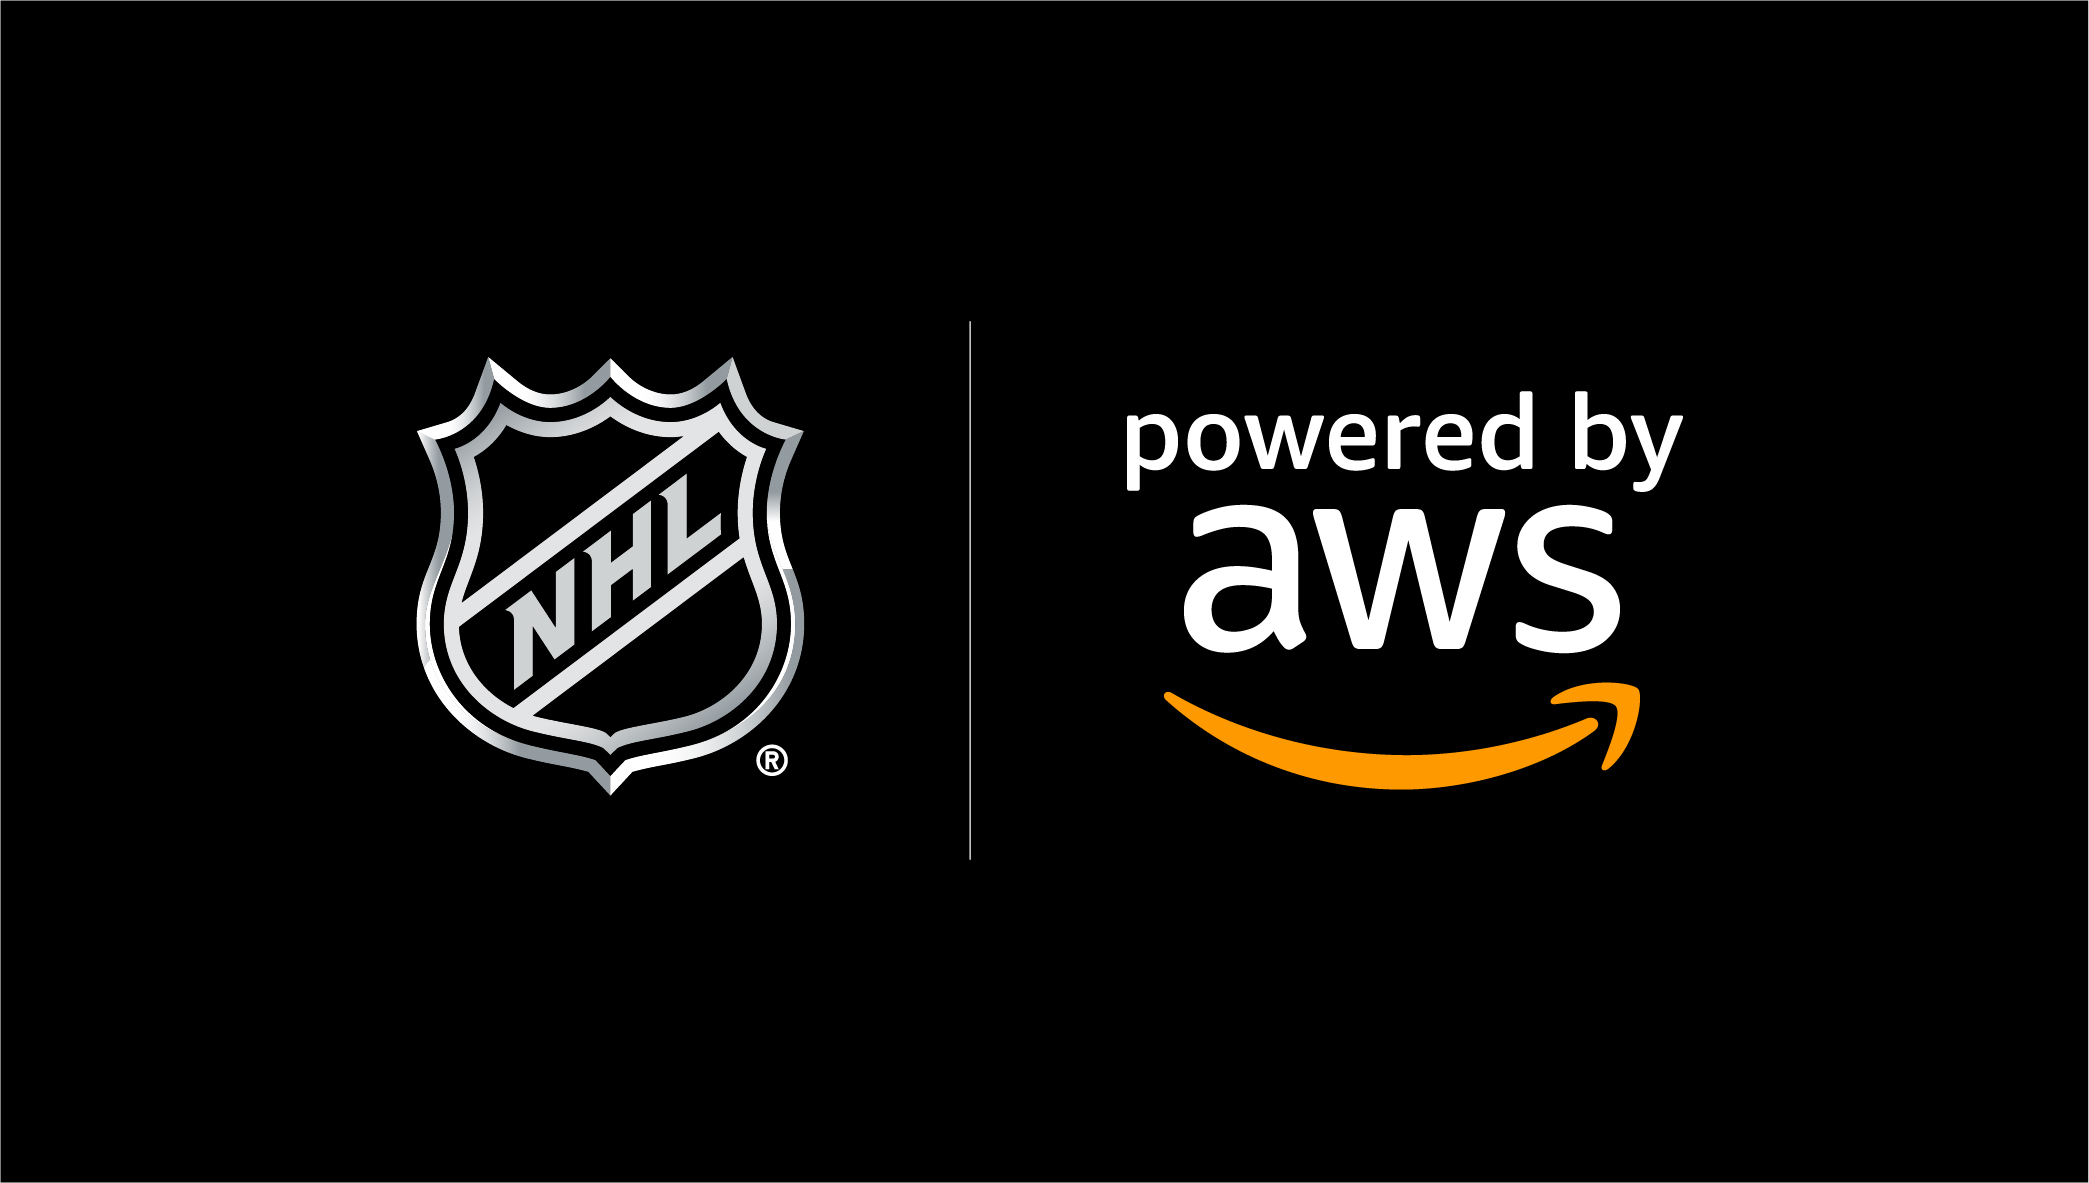 AWS Teams with the National Hockey League to be the Official Cloud Infrastructure Provider of the NHL Business Wire